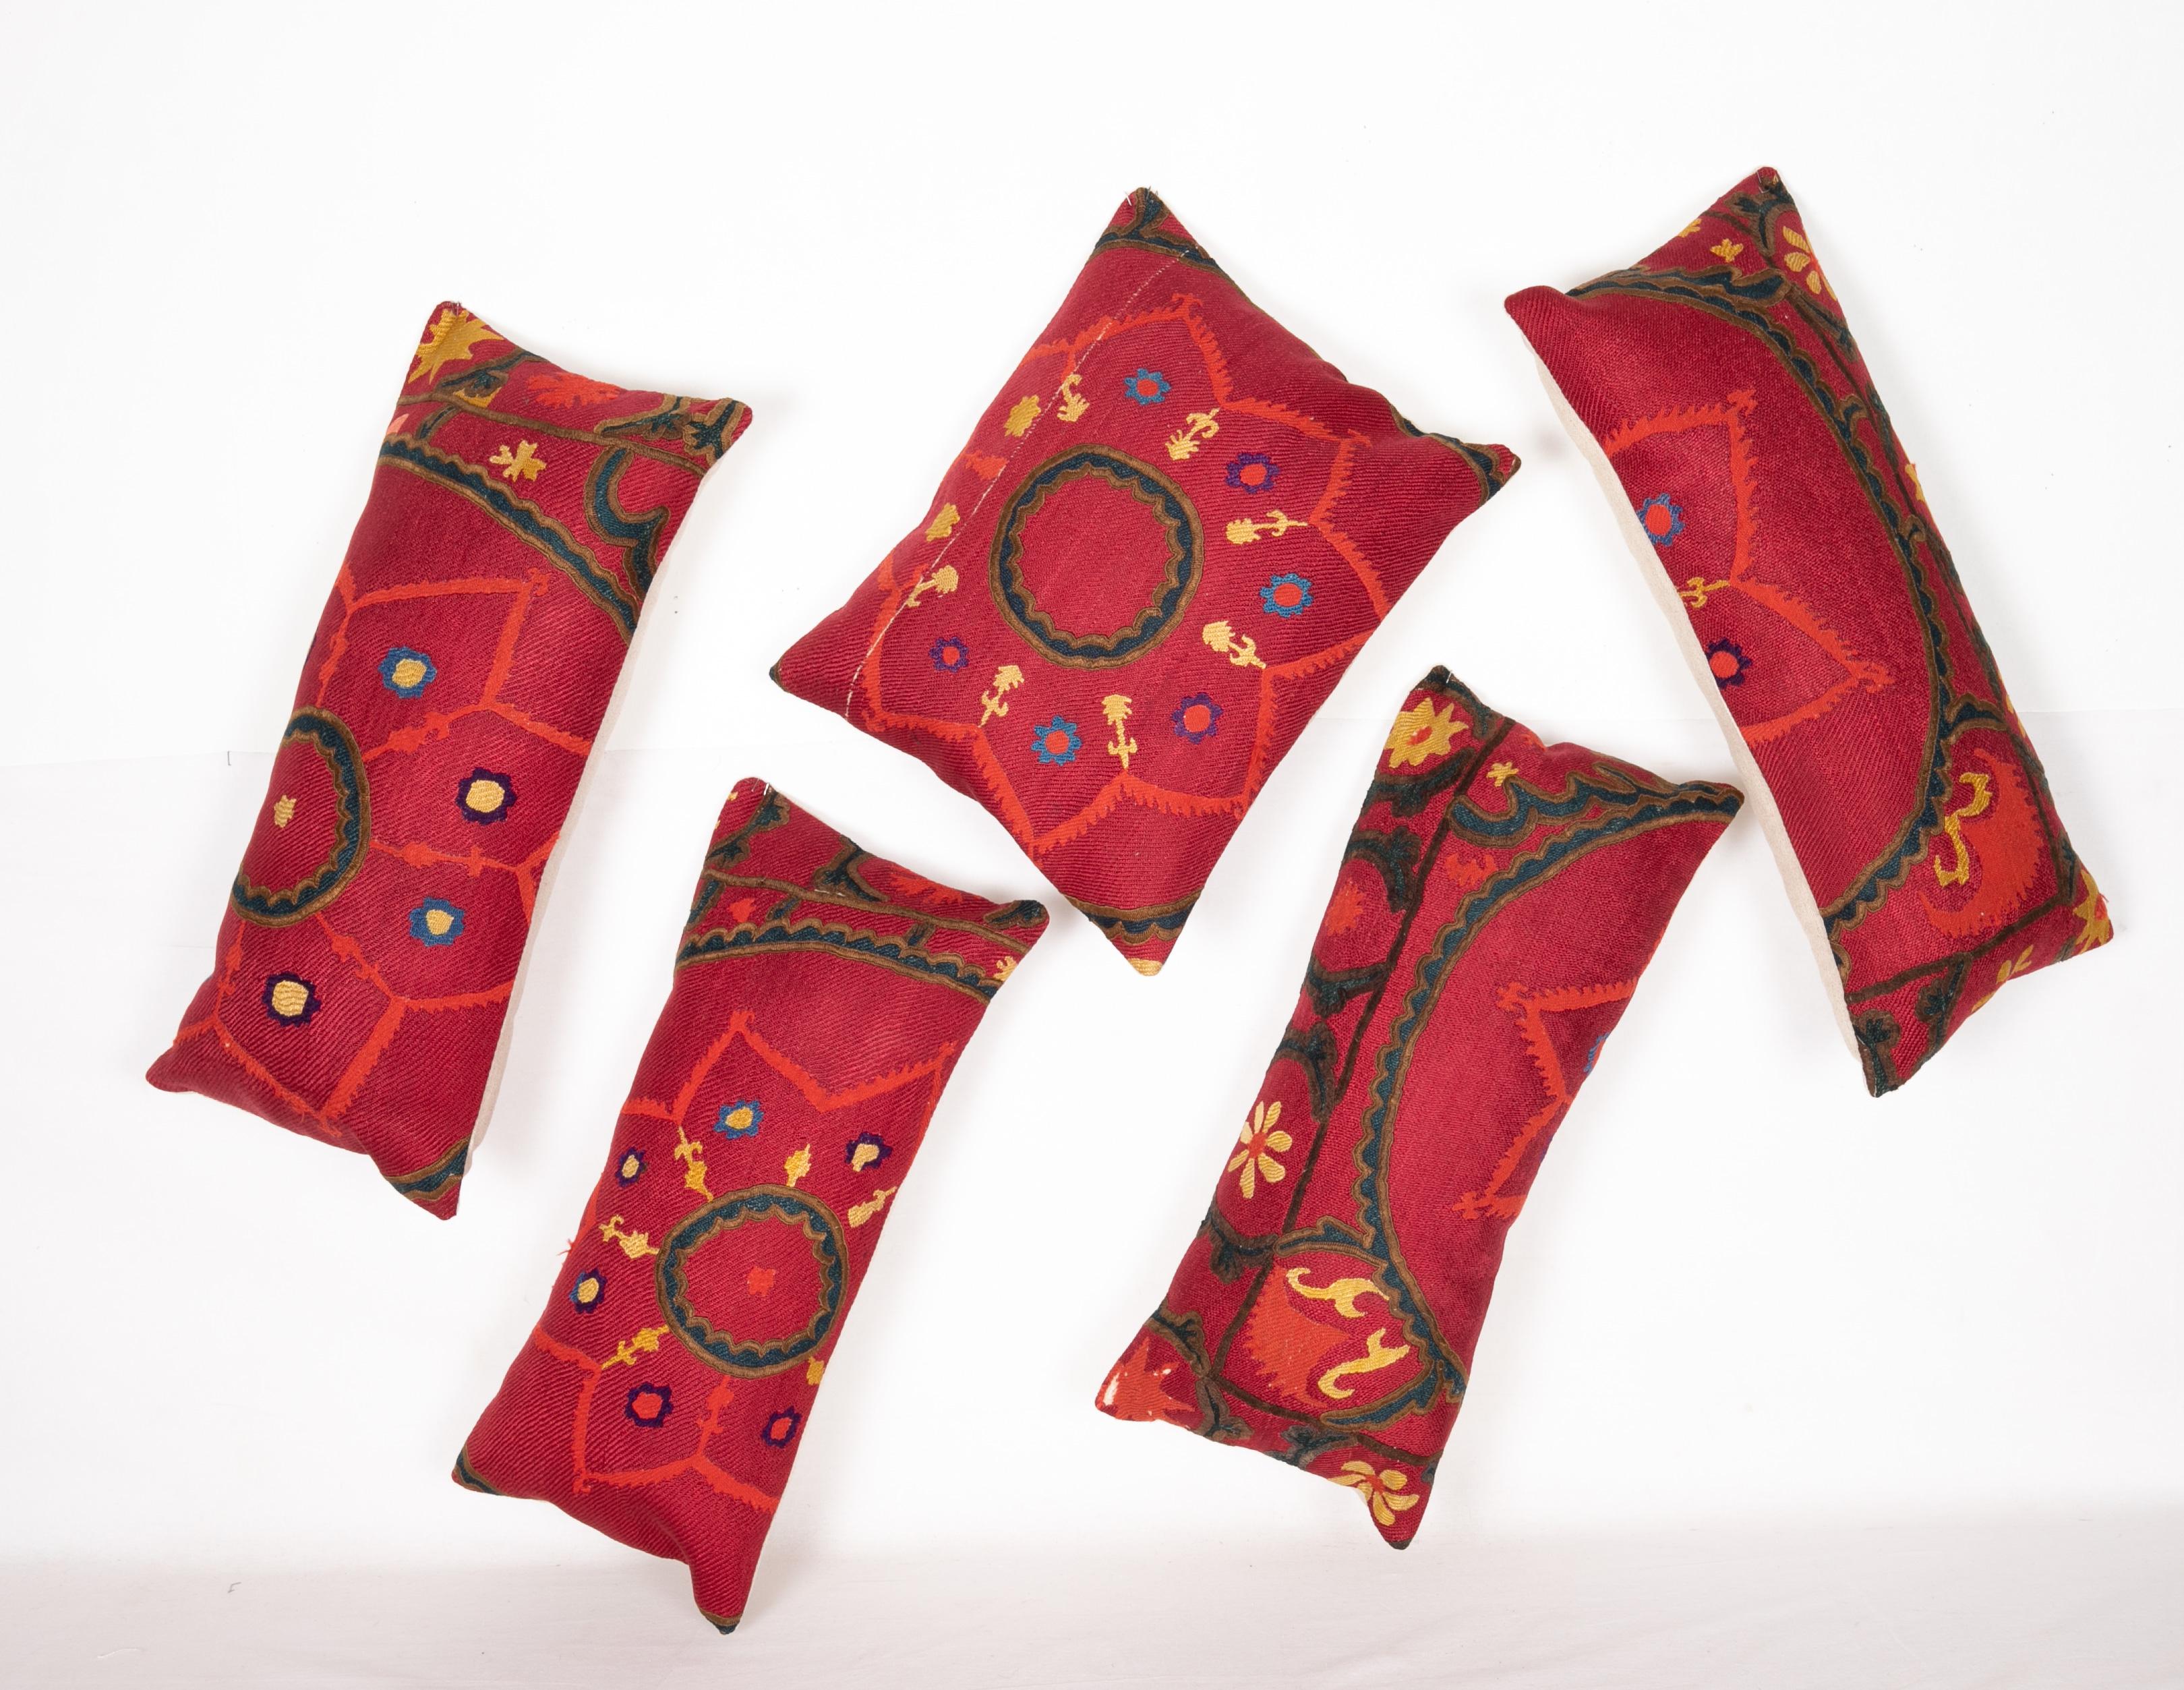 A group of 5 pillow cases fashioned from an antique Tashkent Suzani
Measures: 27 x 62 cm /10.6 x 24.4 in
27 x 64 cm/10.6 x 25.1 in
29 x 63 cm/11.4 x 24.8 in
28x 58 cm/11.0 x 22.8 in
38 x 46 cm /14.9 x 18.11 in.